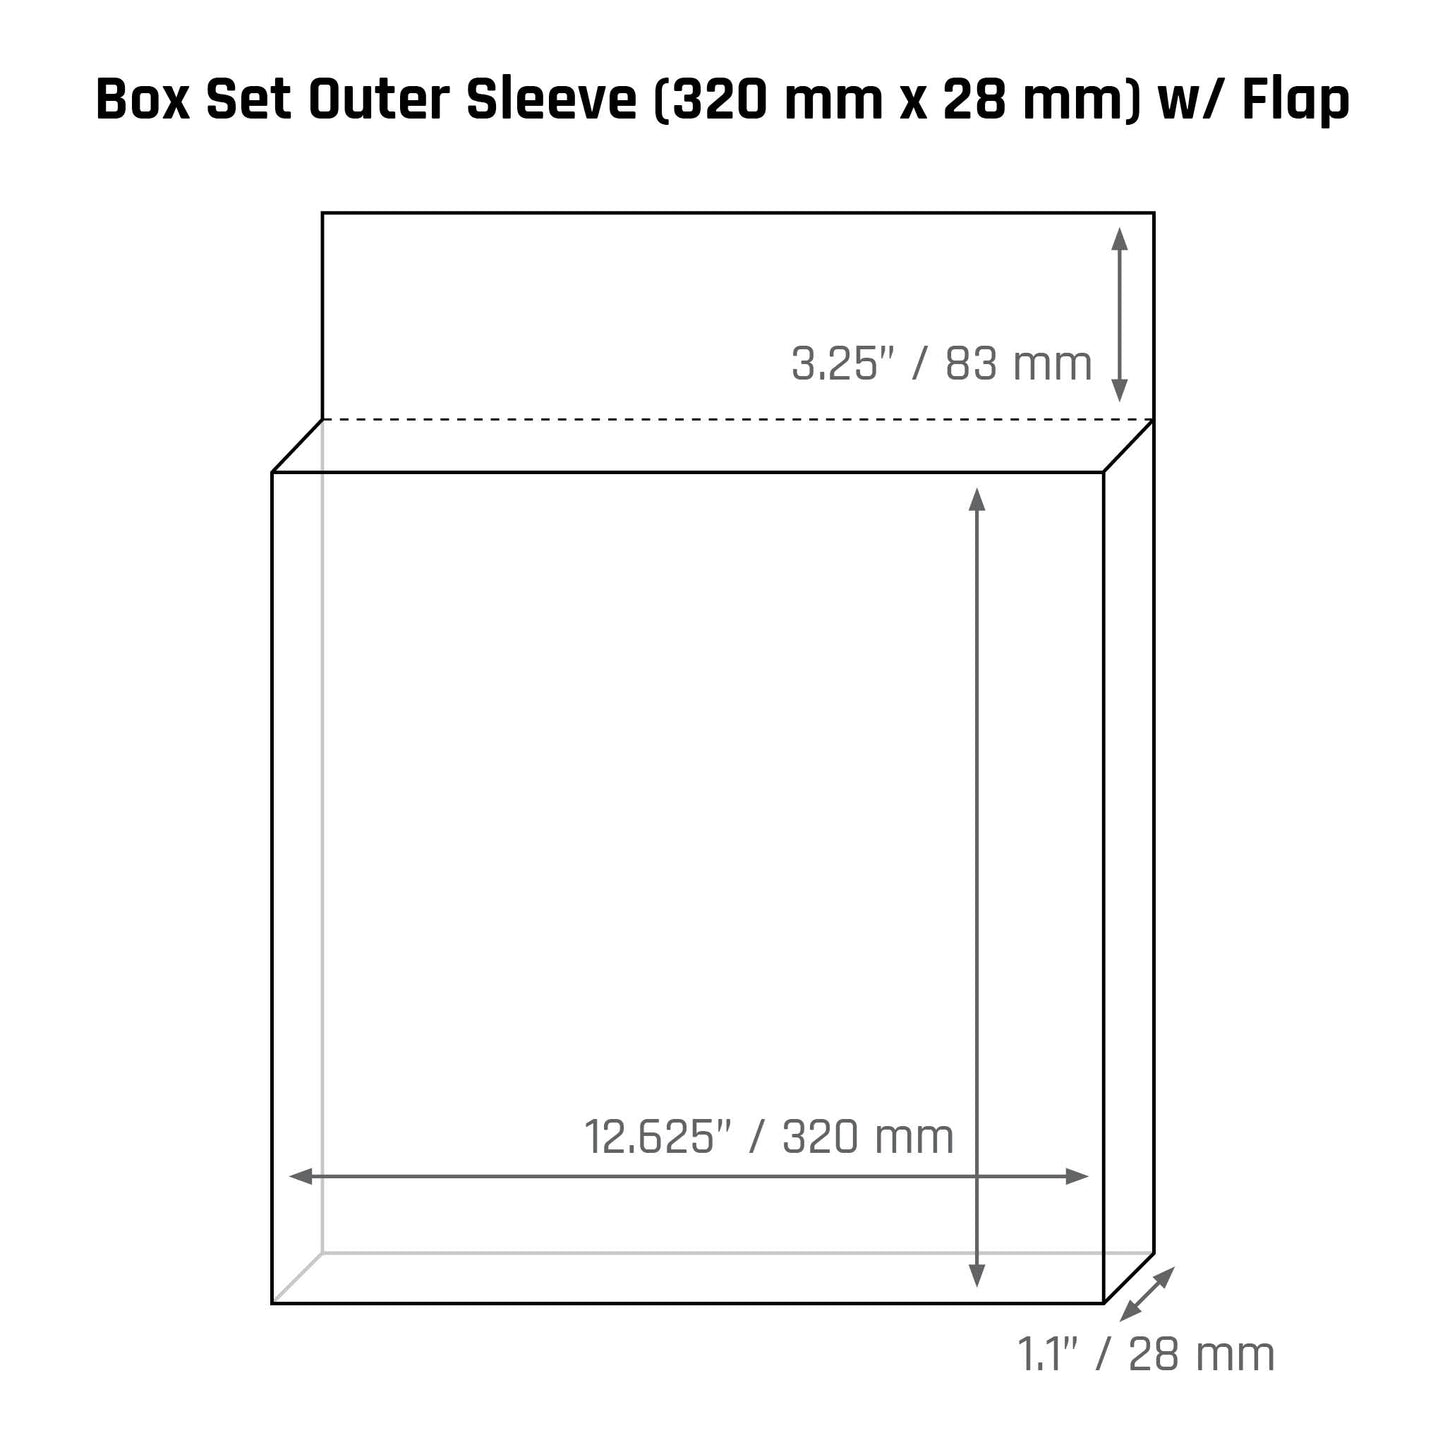 Box Set Outer Sleeve (320 mm x 28 mm) - 3mil